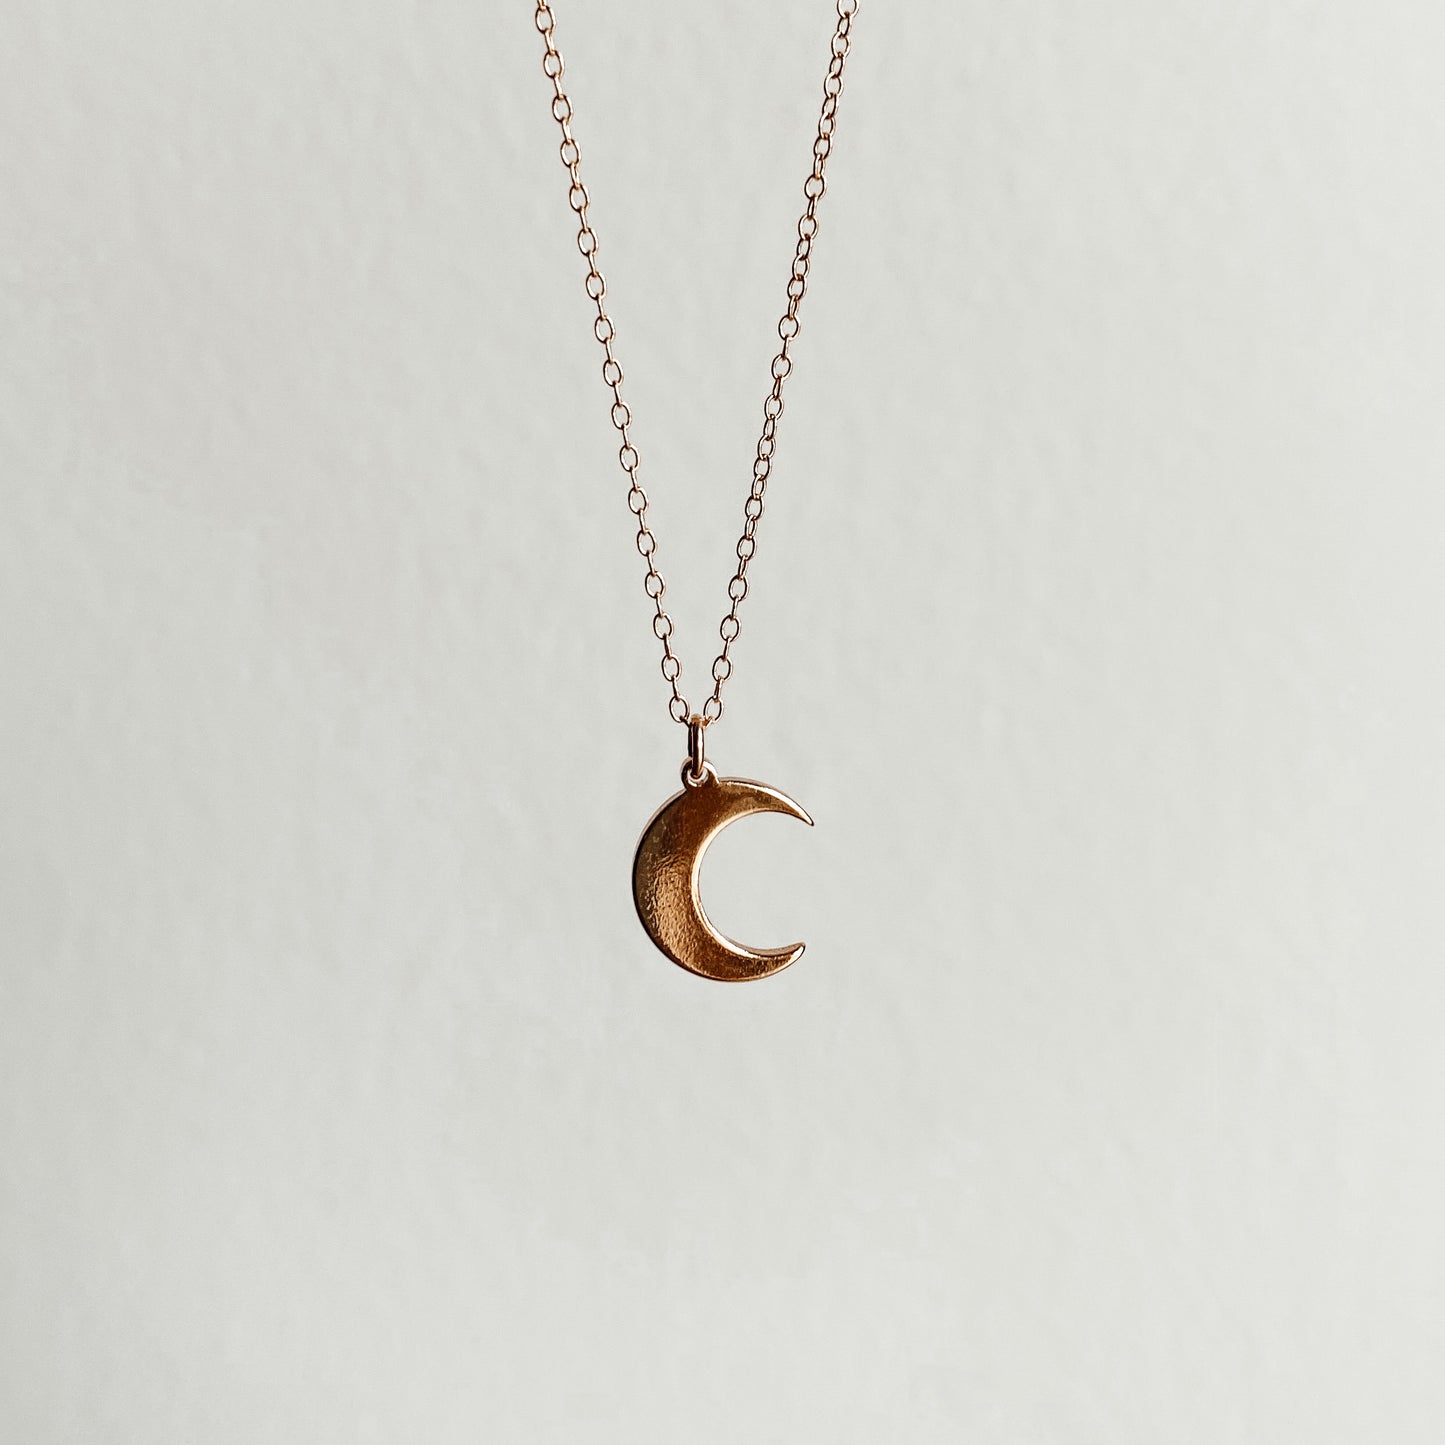 Simple Moon Charm Necklace